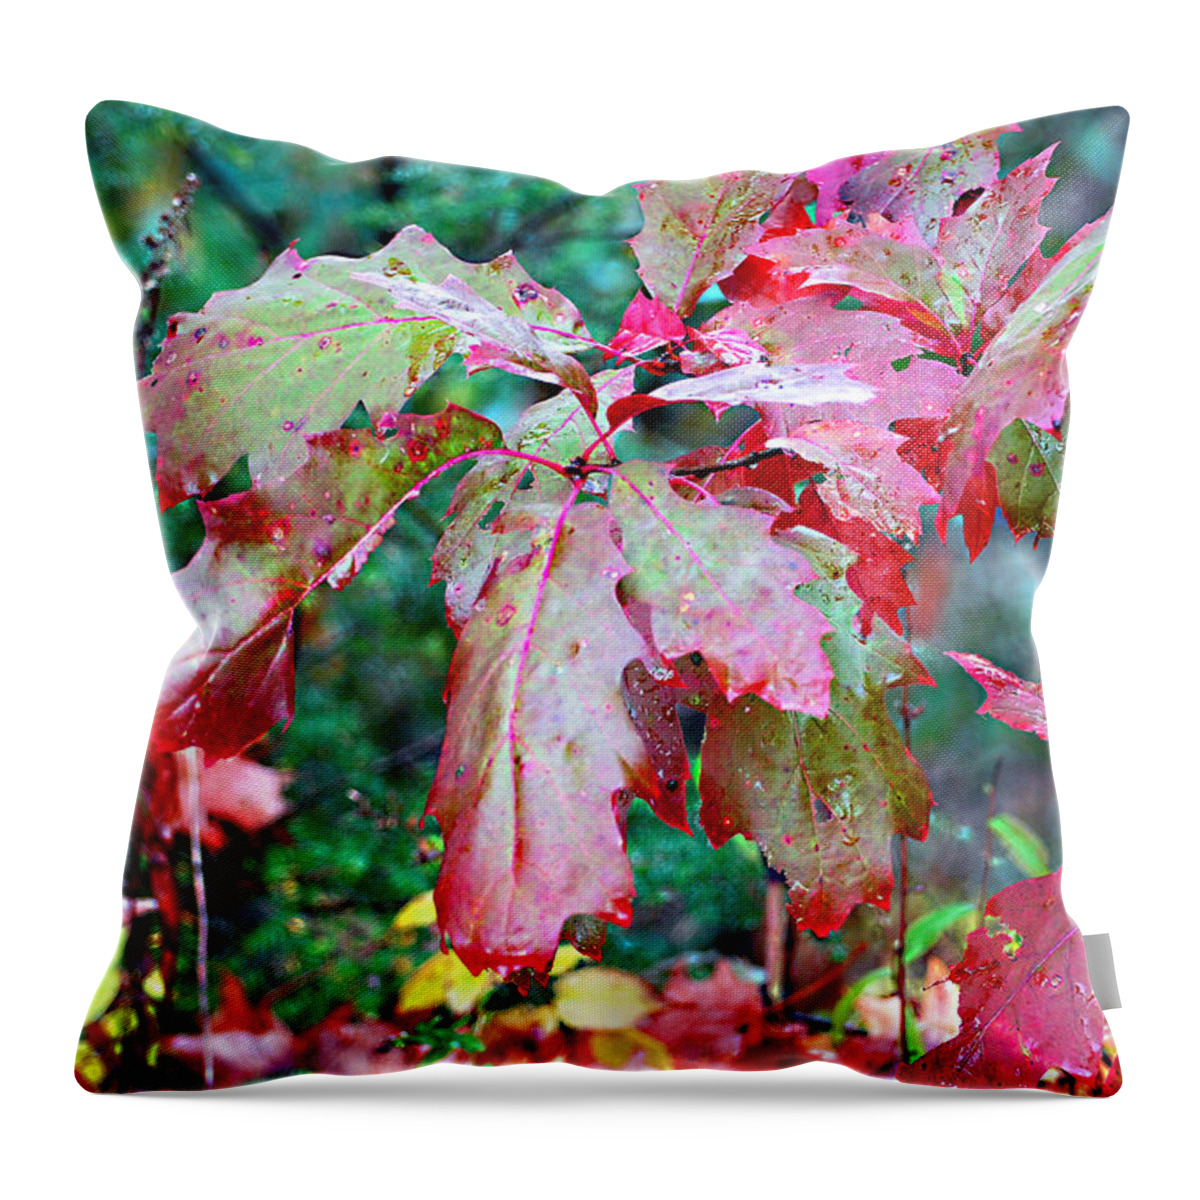 Autumn Throw Pillow featuring the photograph Autumn Red Oak Leaf by Linda Cox